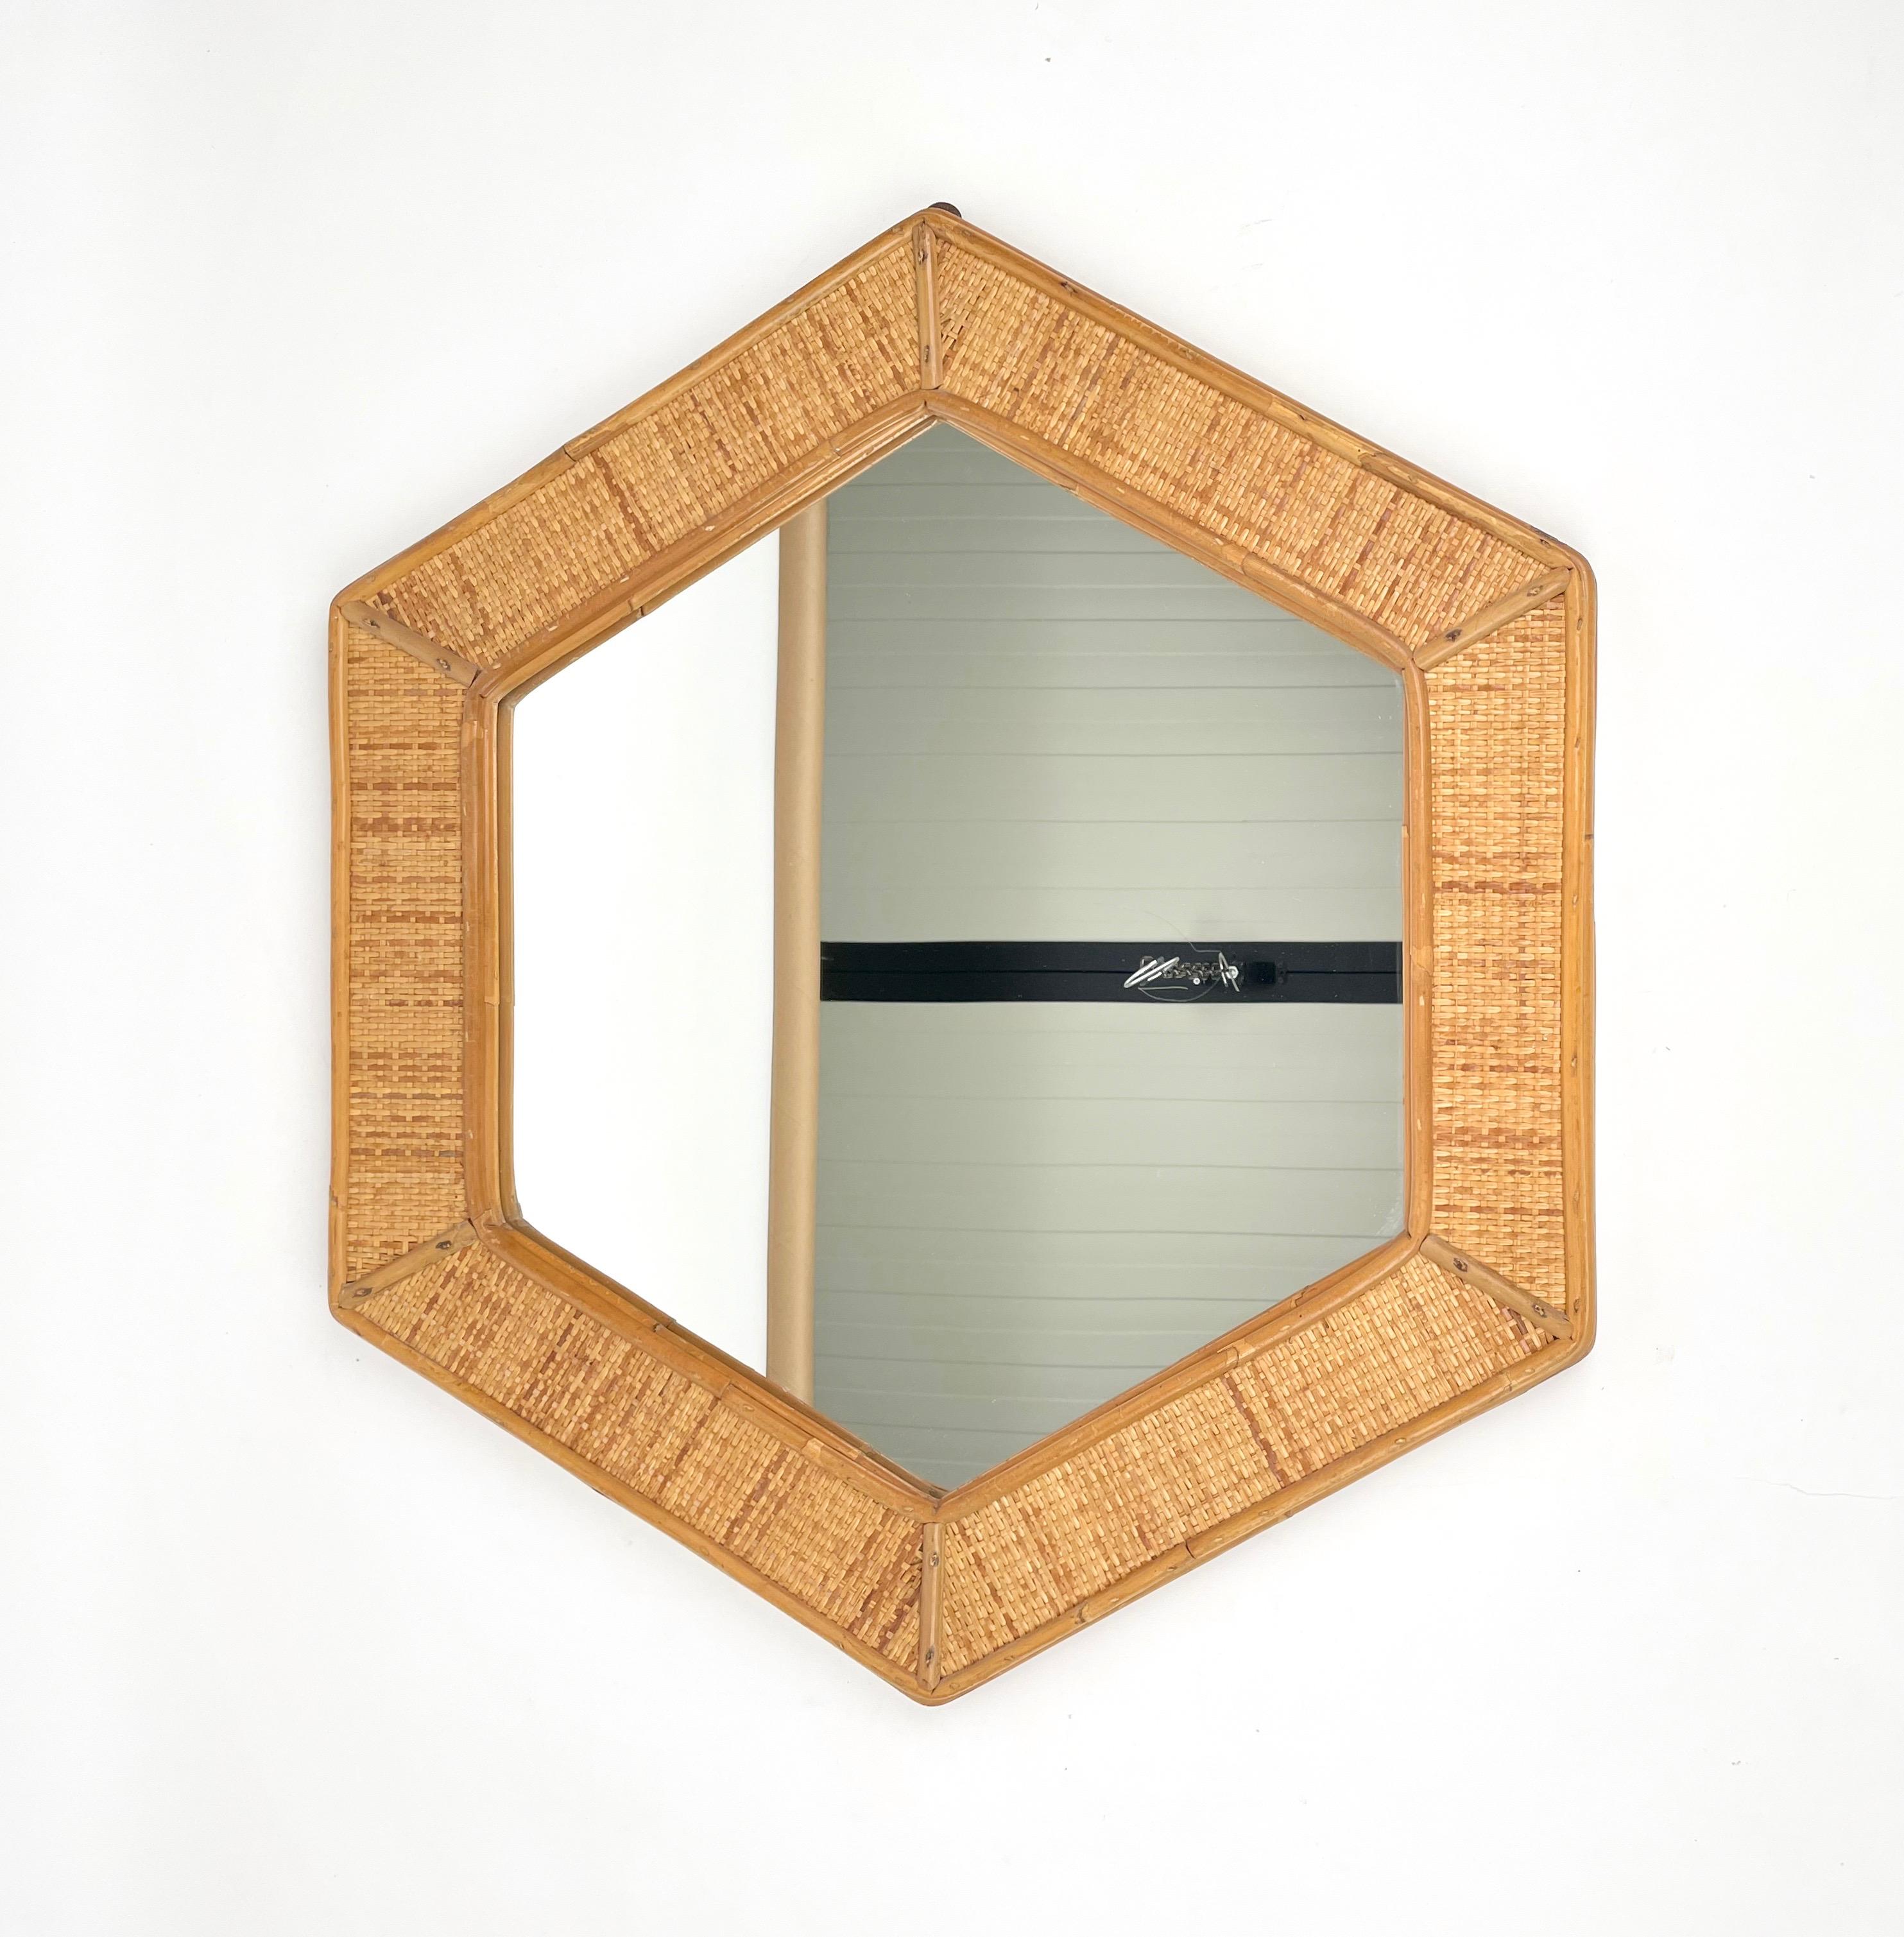 Hexagonal wall mirror featuring rattan frame. Made in Italy in the 1970s.